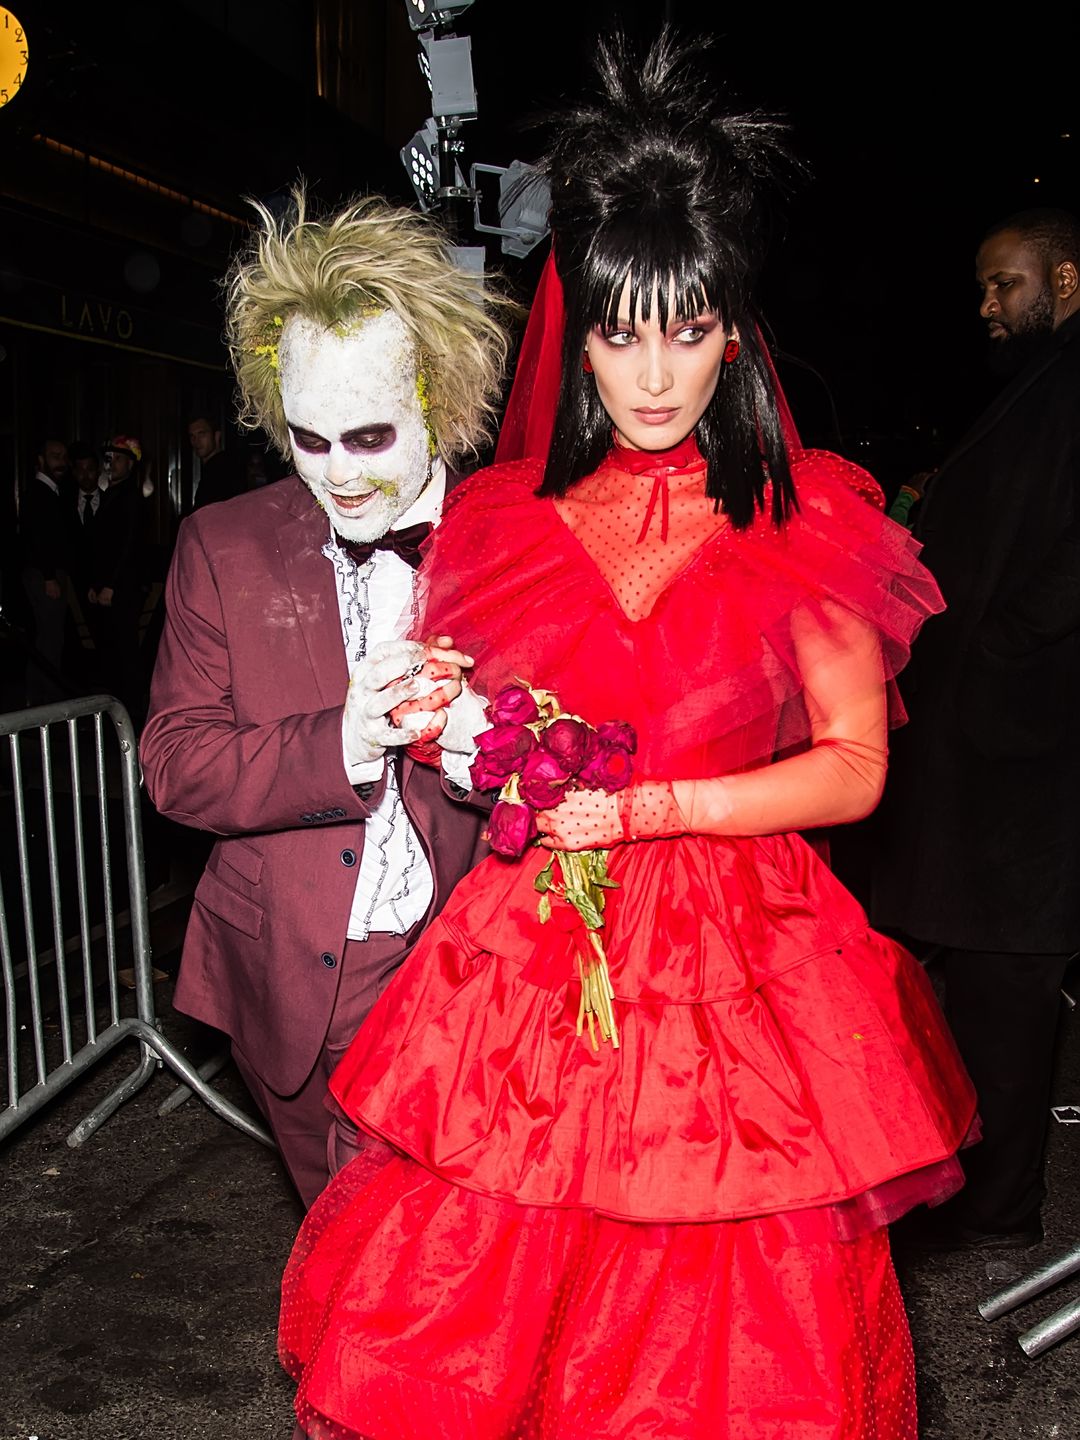 Back when Bella Hadid was dating The Weeknd, the pair took their cues from an iconic Halloween film